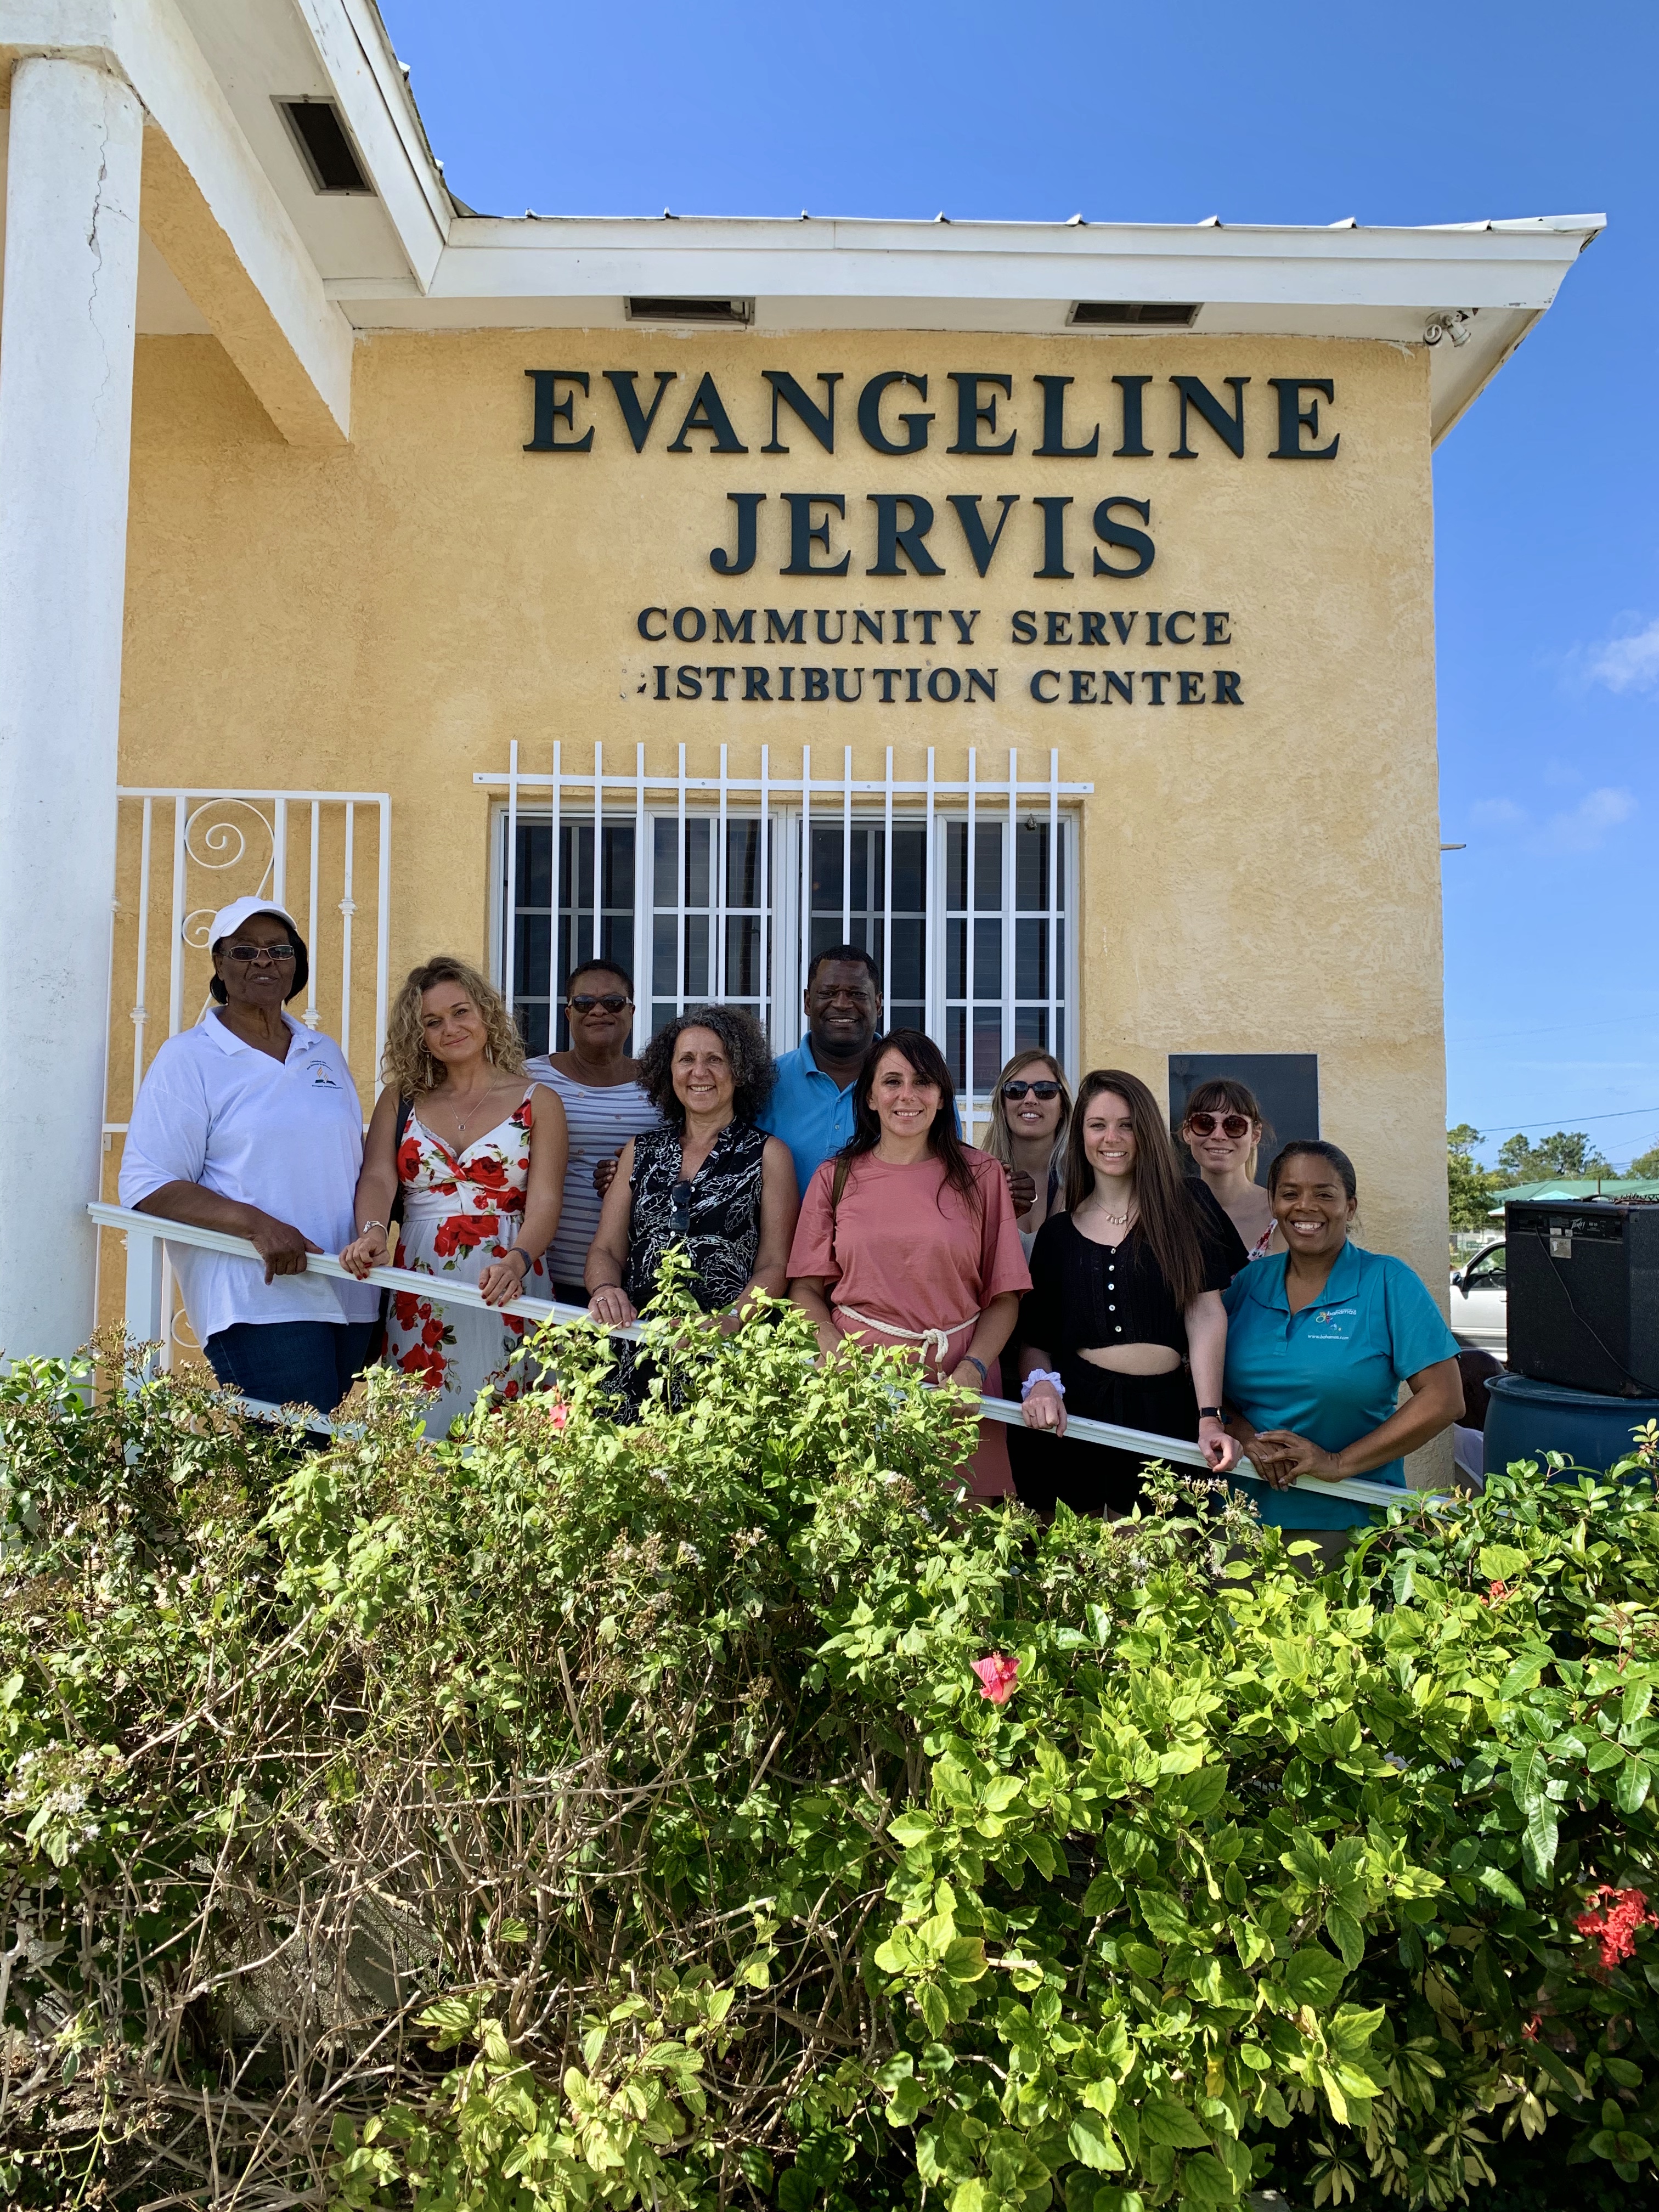 The group of French influencers visited the Evangeline Jervis Community Service Distribution Centre to learn about areas of need on the island and how visitors are able to assist. Here the group is pictured with BMOTA representatives and members of the Fr